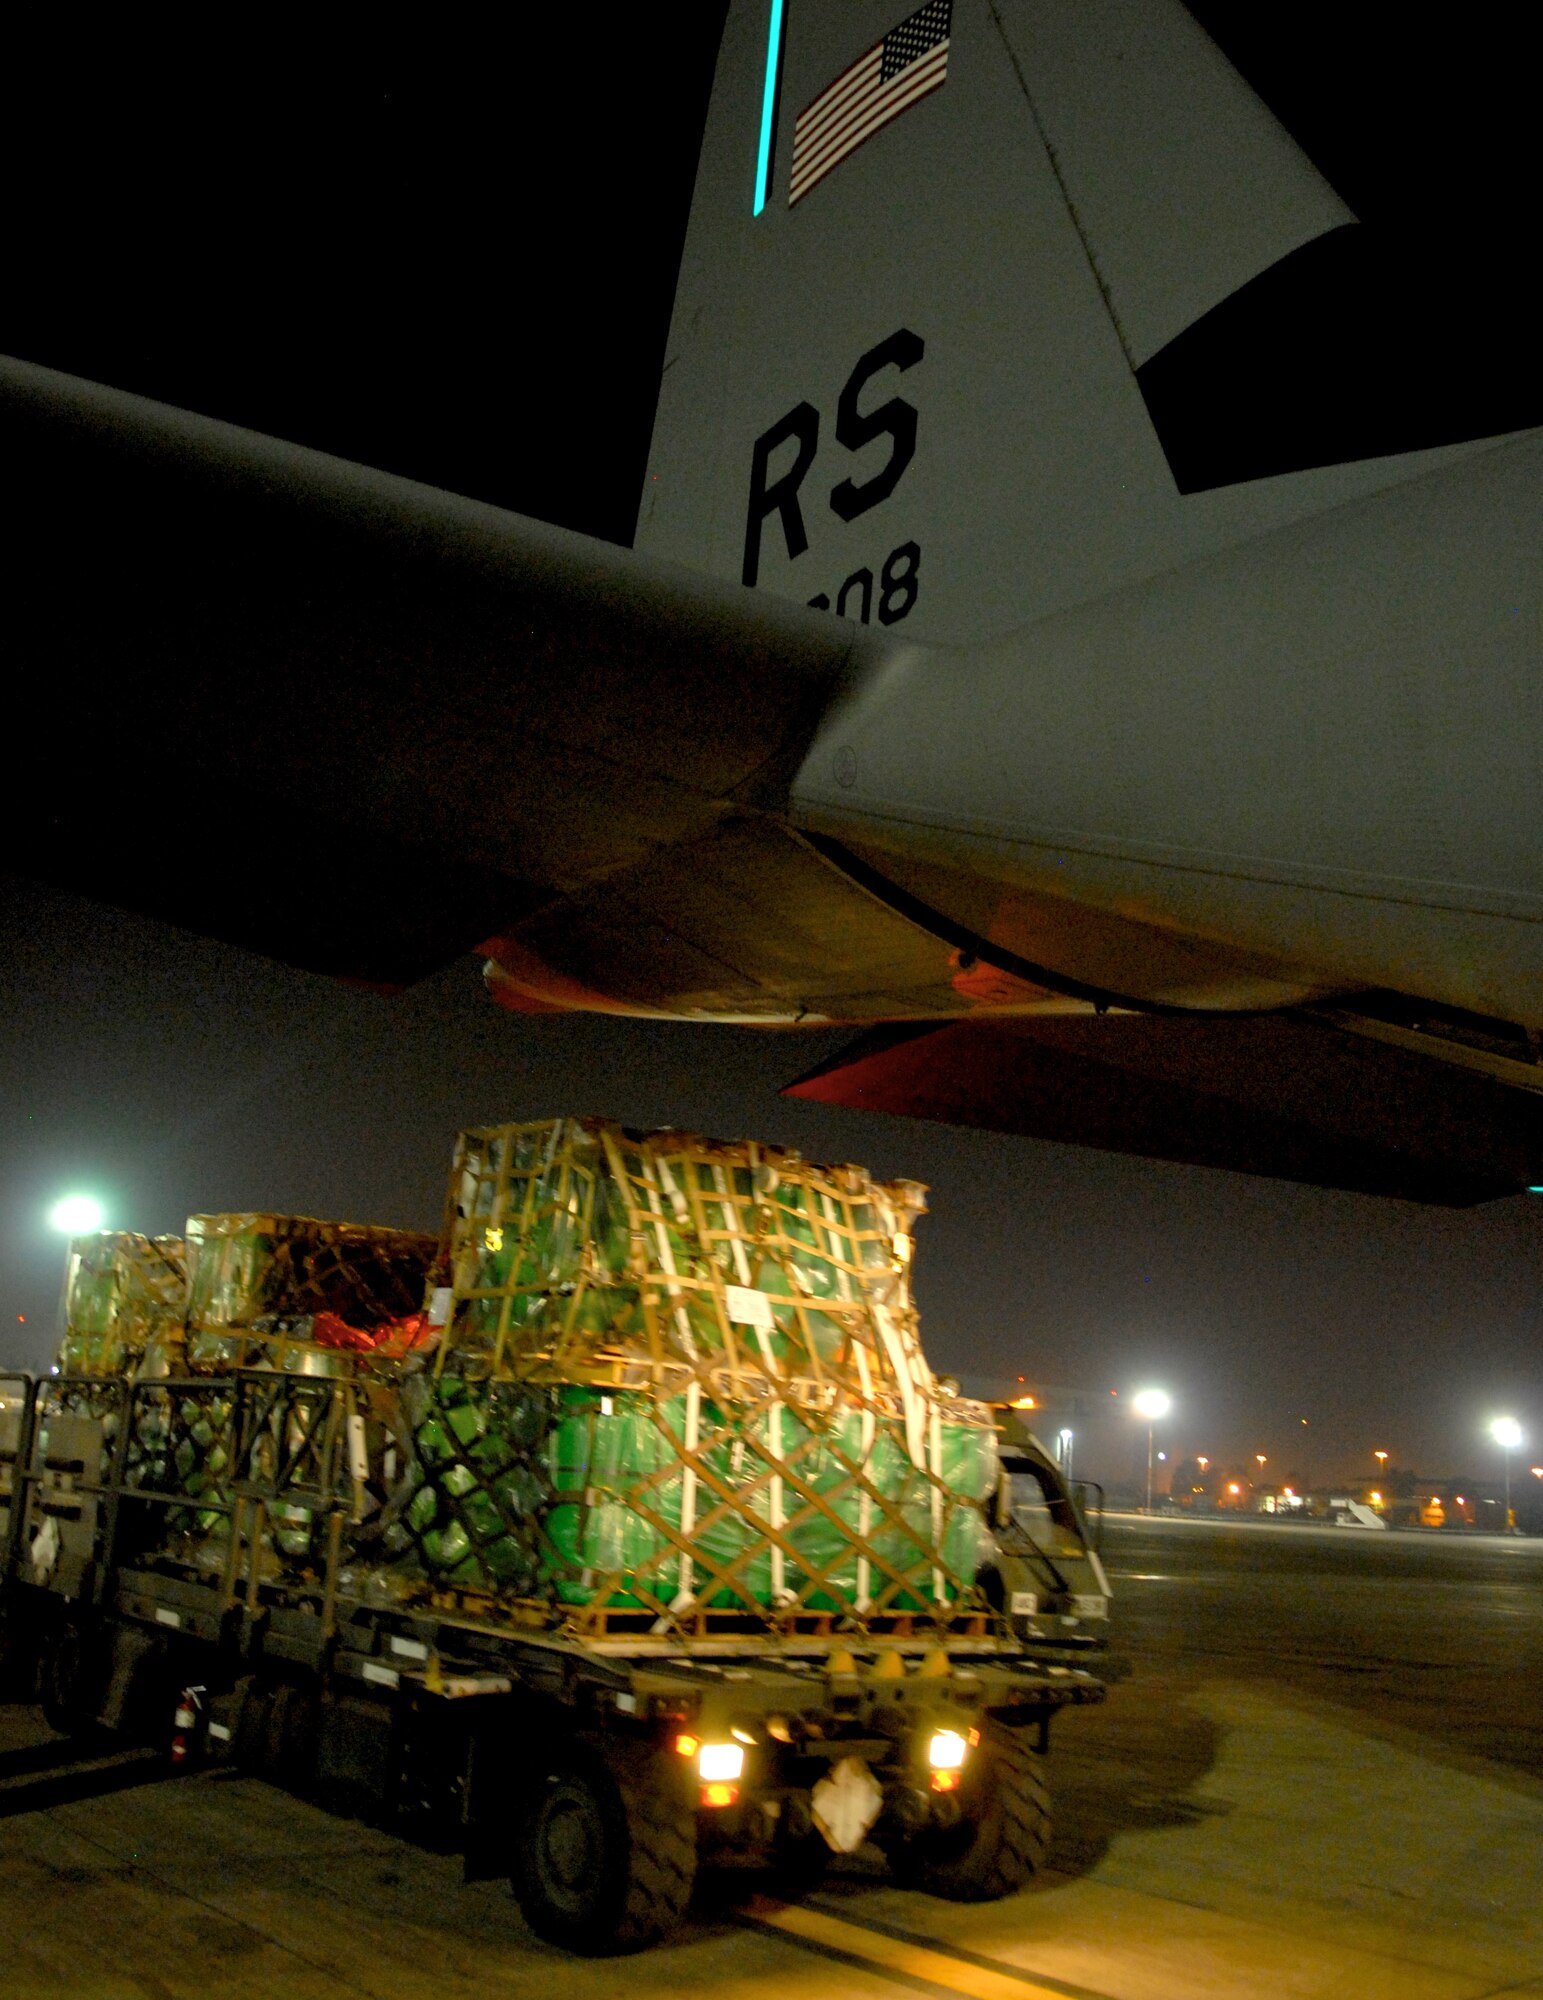 TEL AVIV, Israel – Israeli officials off load approximately 13.5 tons of fire suppression agent from a C-130J aircraft from Ramstein Air Base, Germany, onto an Israeli K-loader Sunday, Dec. 5, 2010, at Tel Aviv International Airport. So far the United States has donated 30,000 liters of fire retardant, with plans to deliver 60,000 more over the next three days to aid firefighting efforts in Israel. (U.S. Air Force photo by Capt. John Ross)